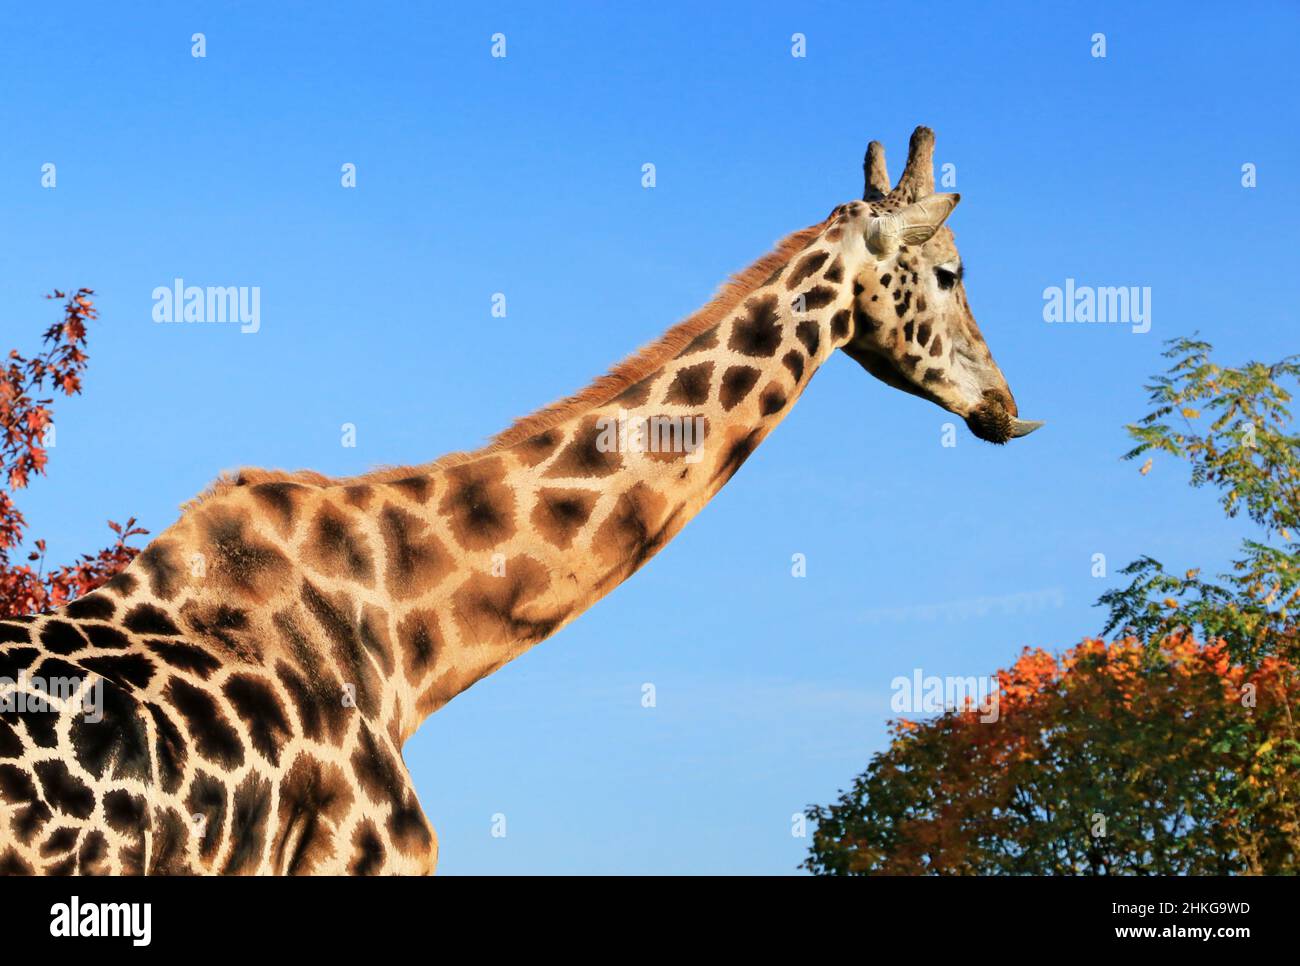 Head and neck of a giraffe on a background of blue sky. Stock Photo